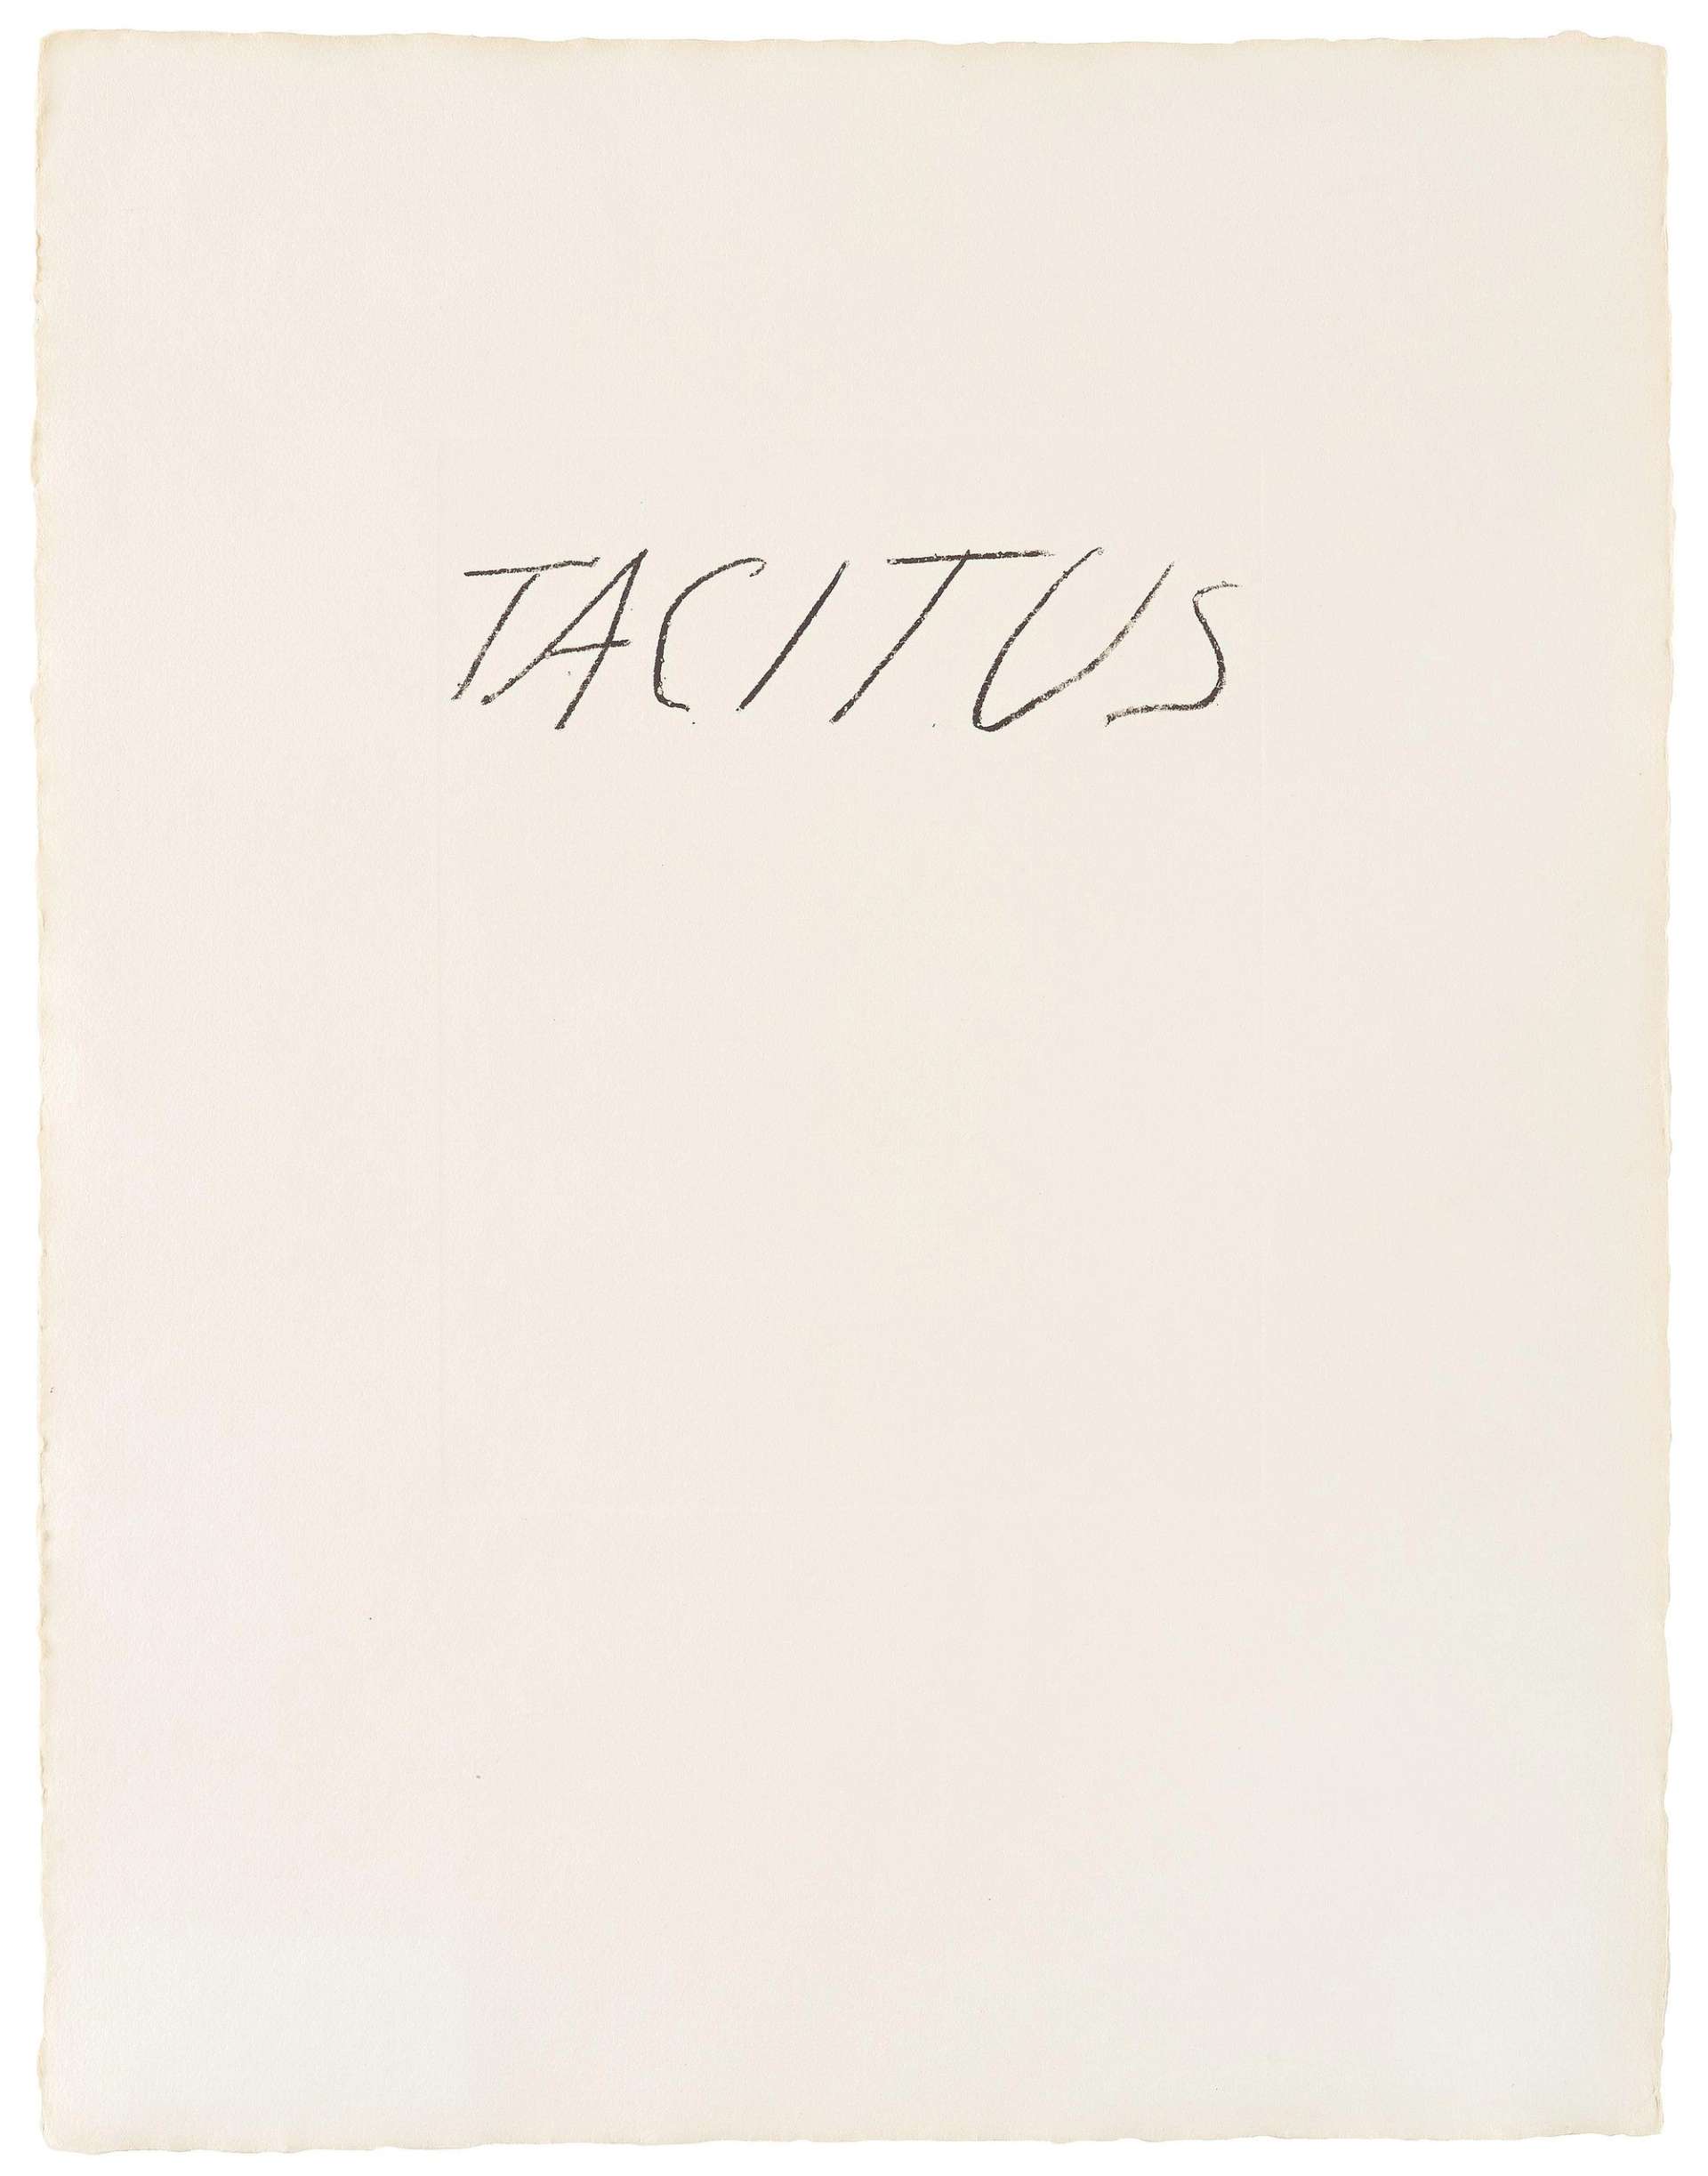 Tacitus - Signed Print by Cy Twombly 1975 - MyArtBroker